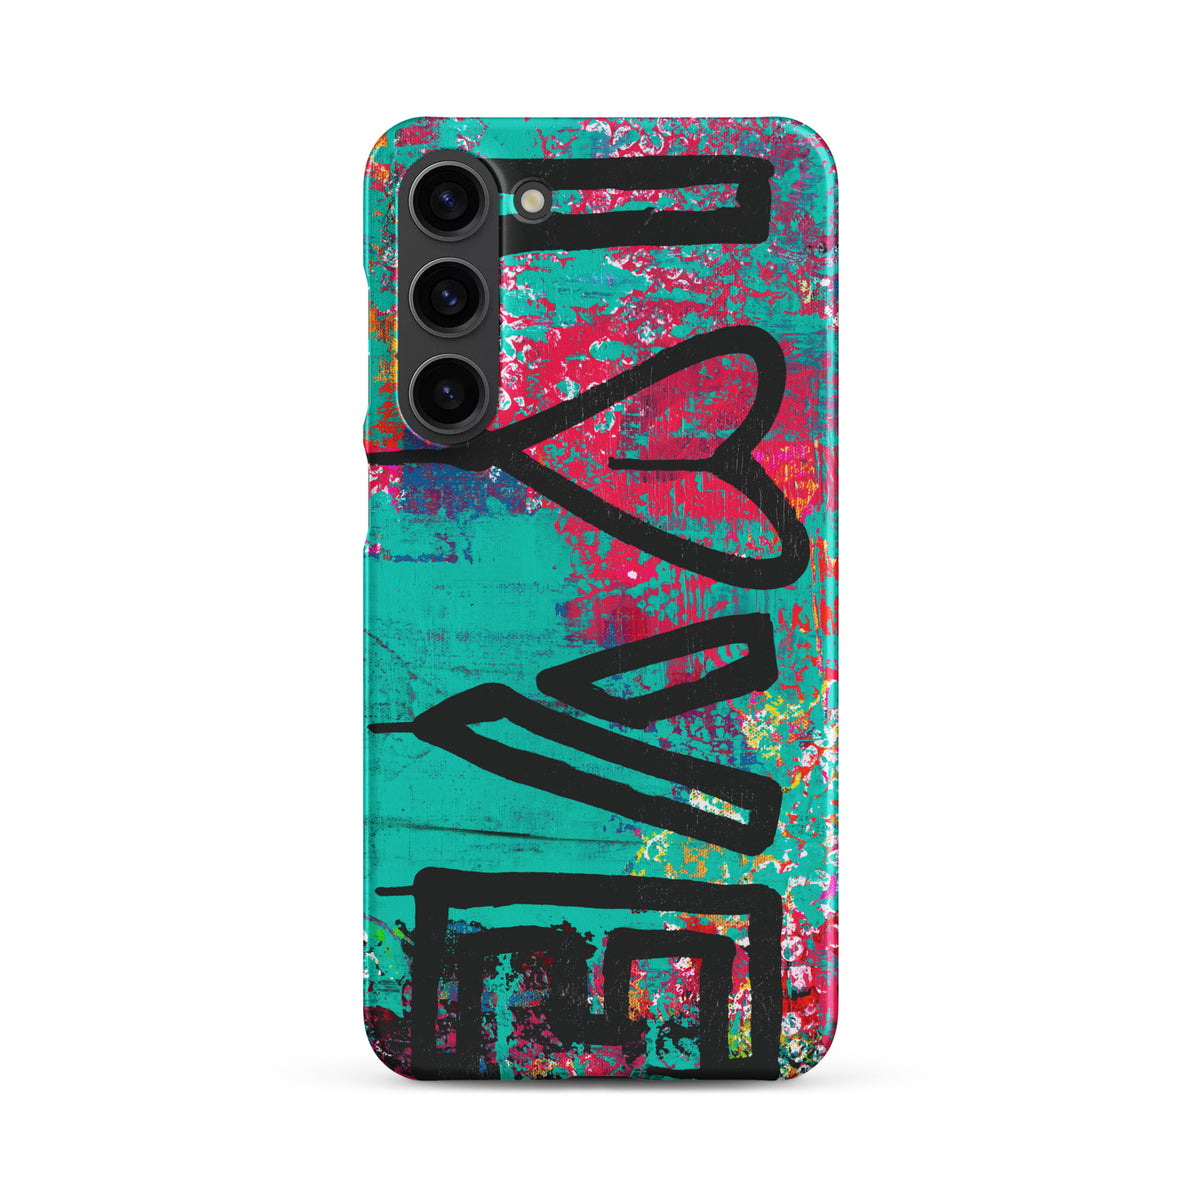 Turquoise Love Snap case for Samsung®